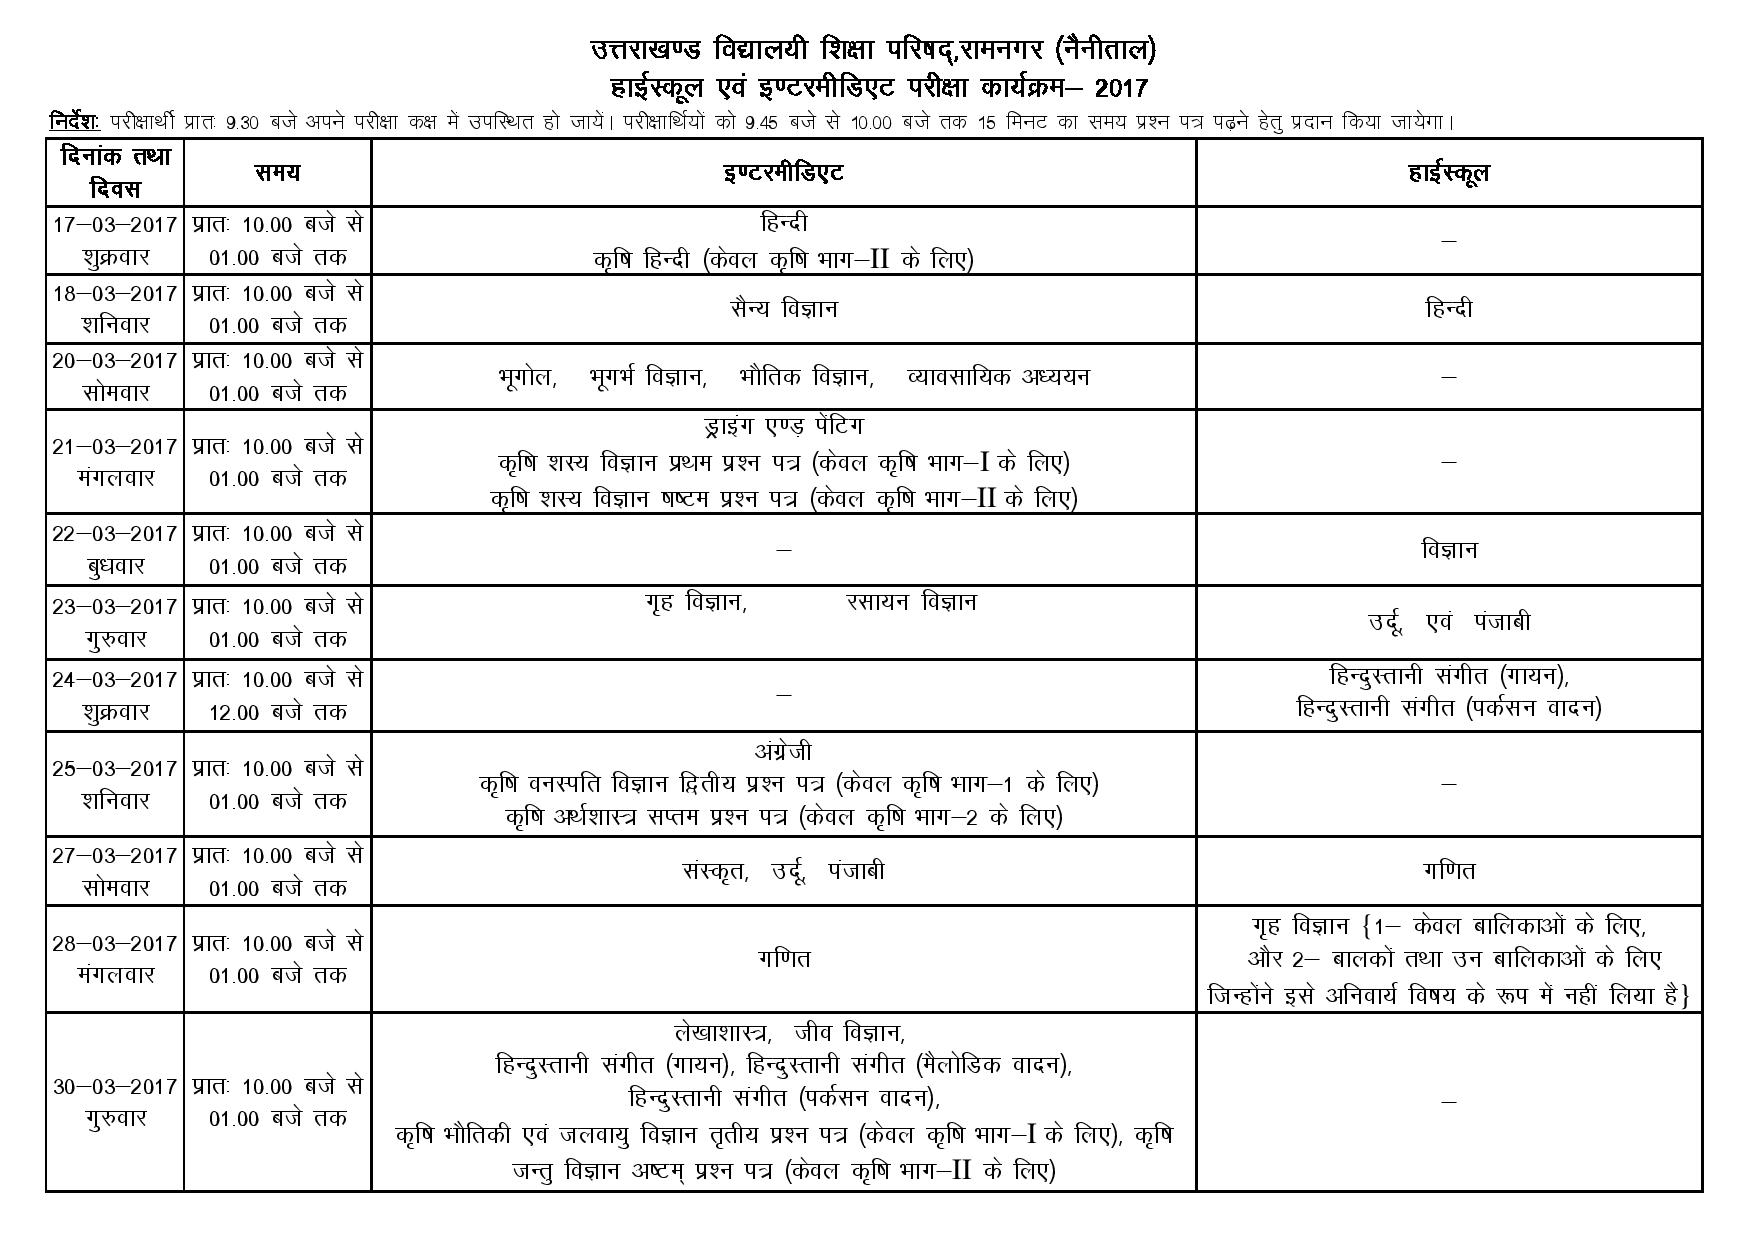 UP Board Inter 1st year Result 